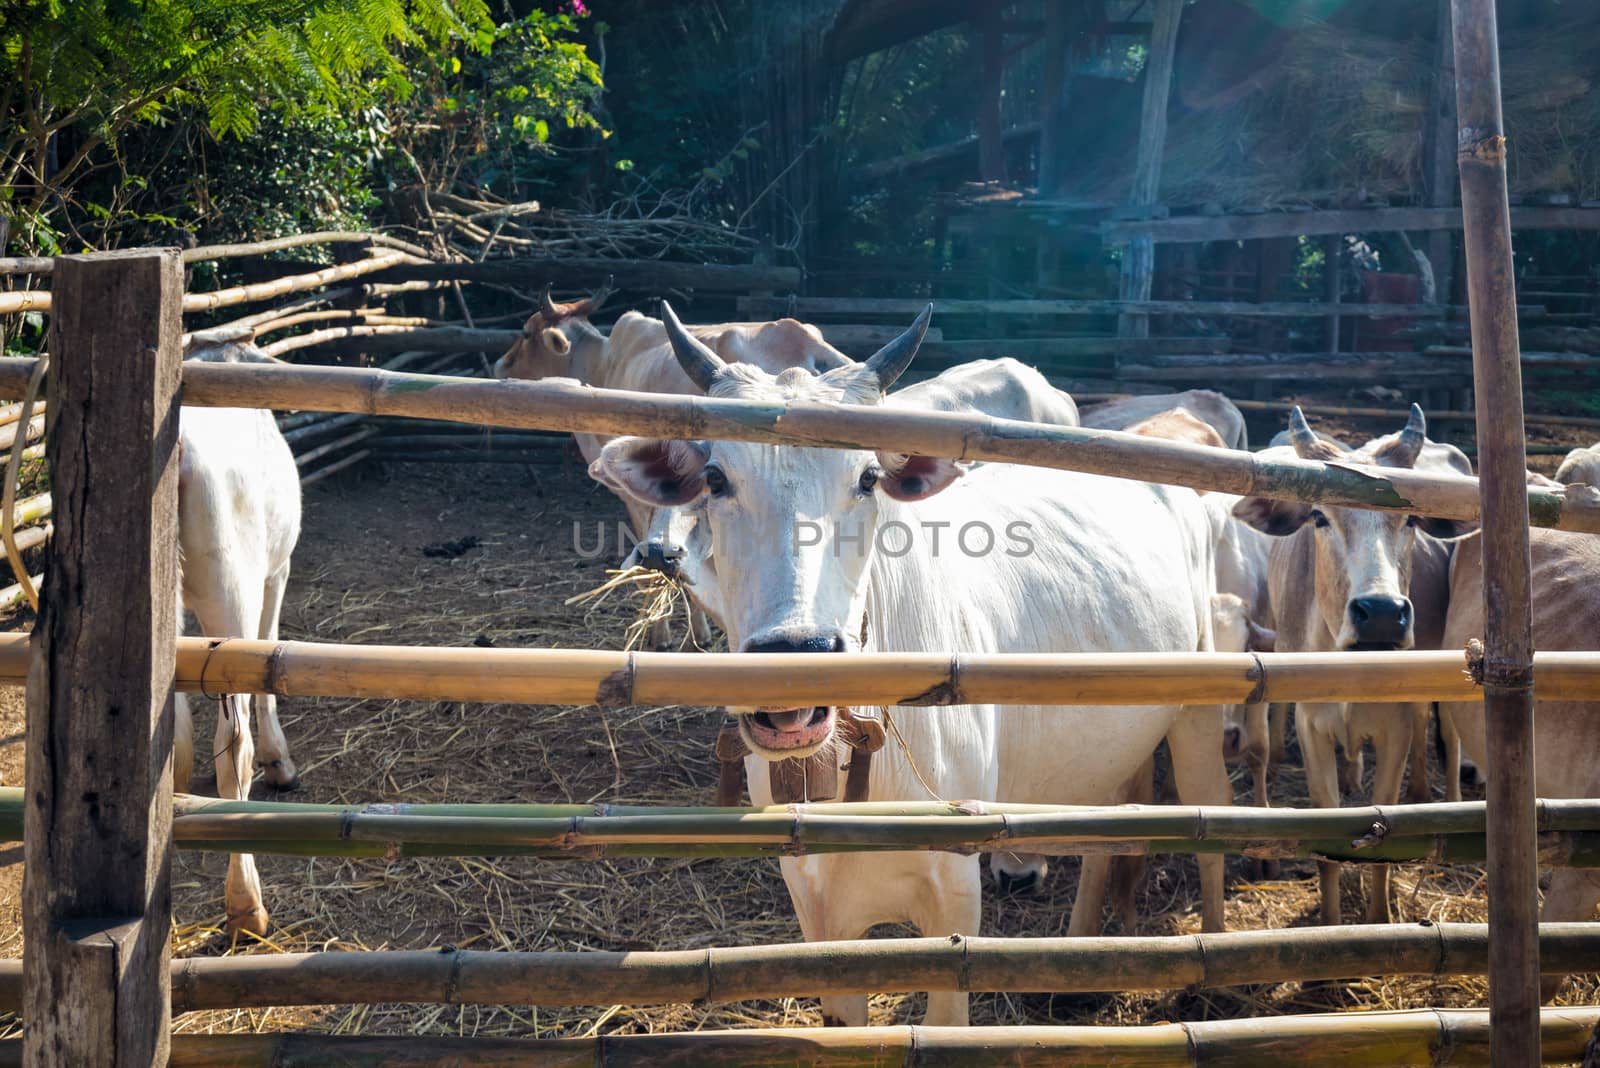 livestock in thailand cow eating straw in corral fence wood